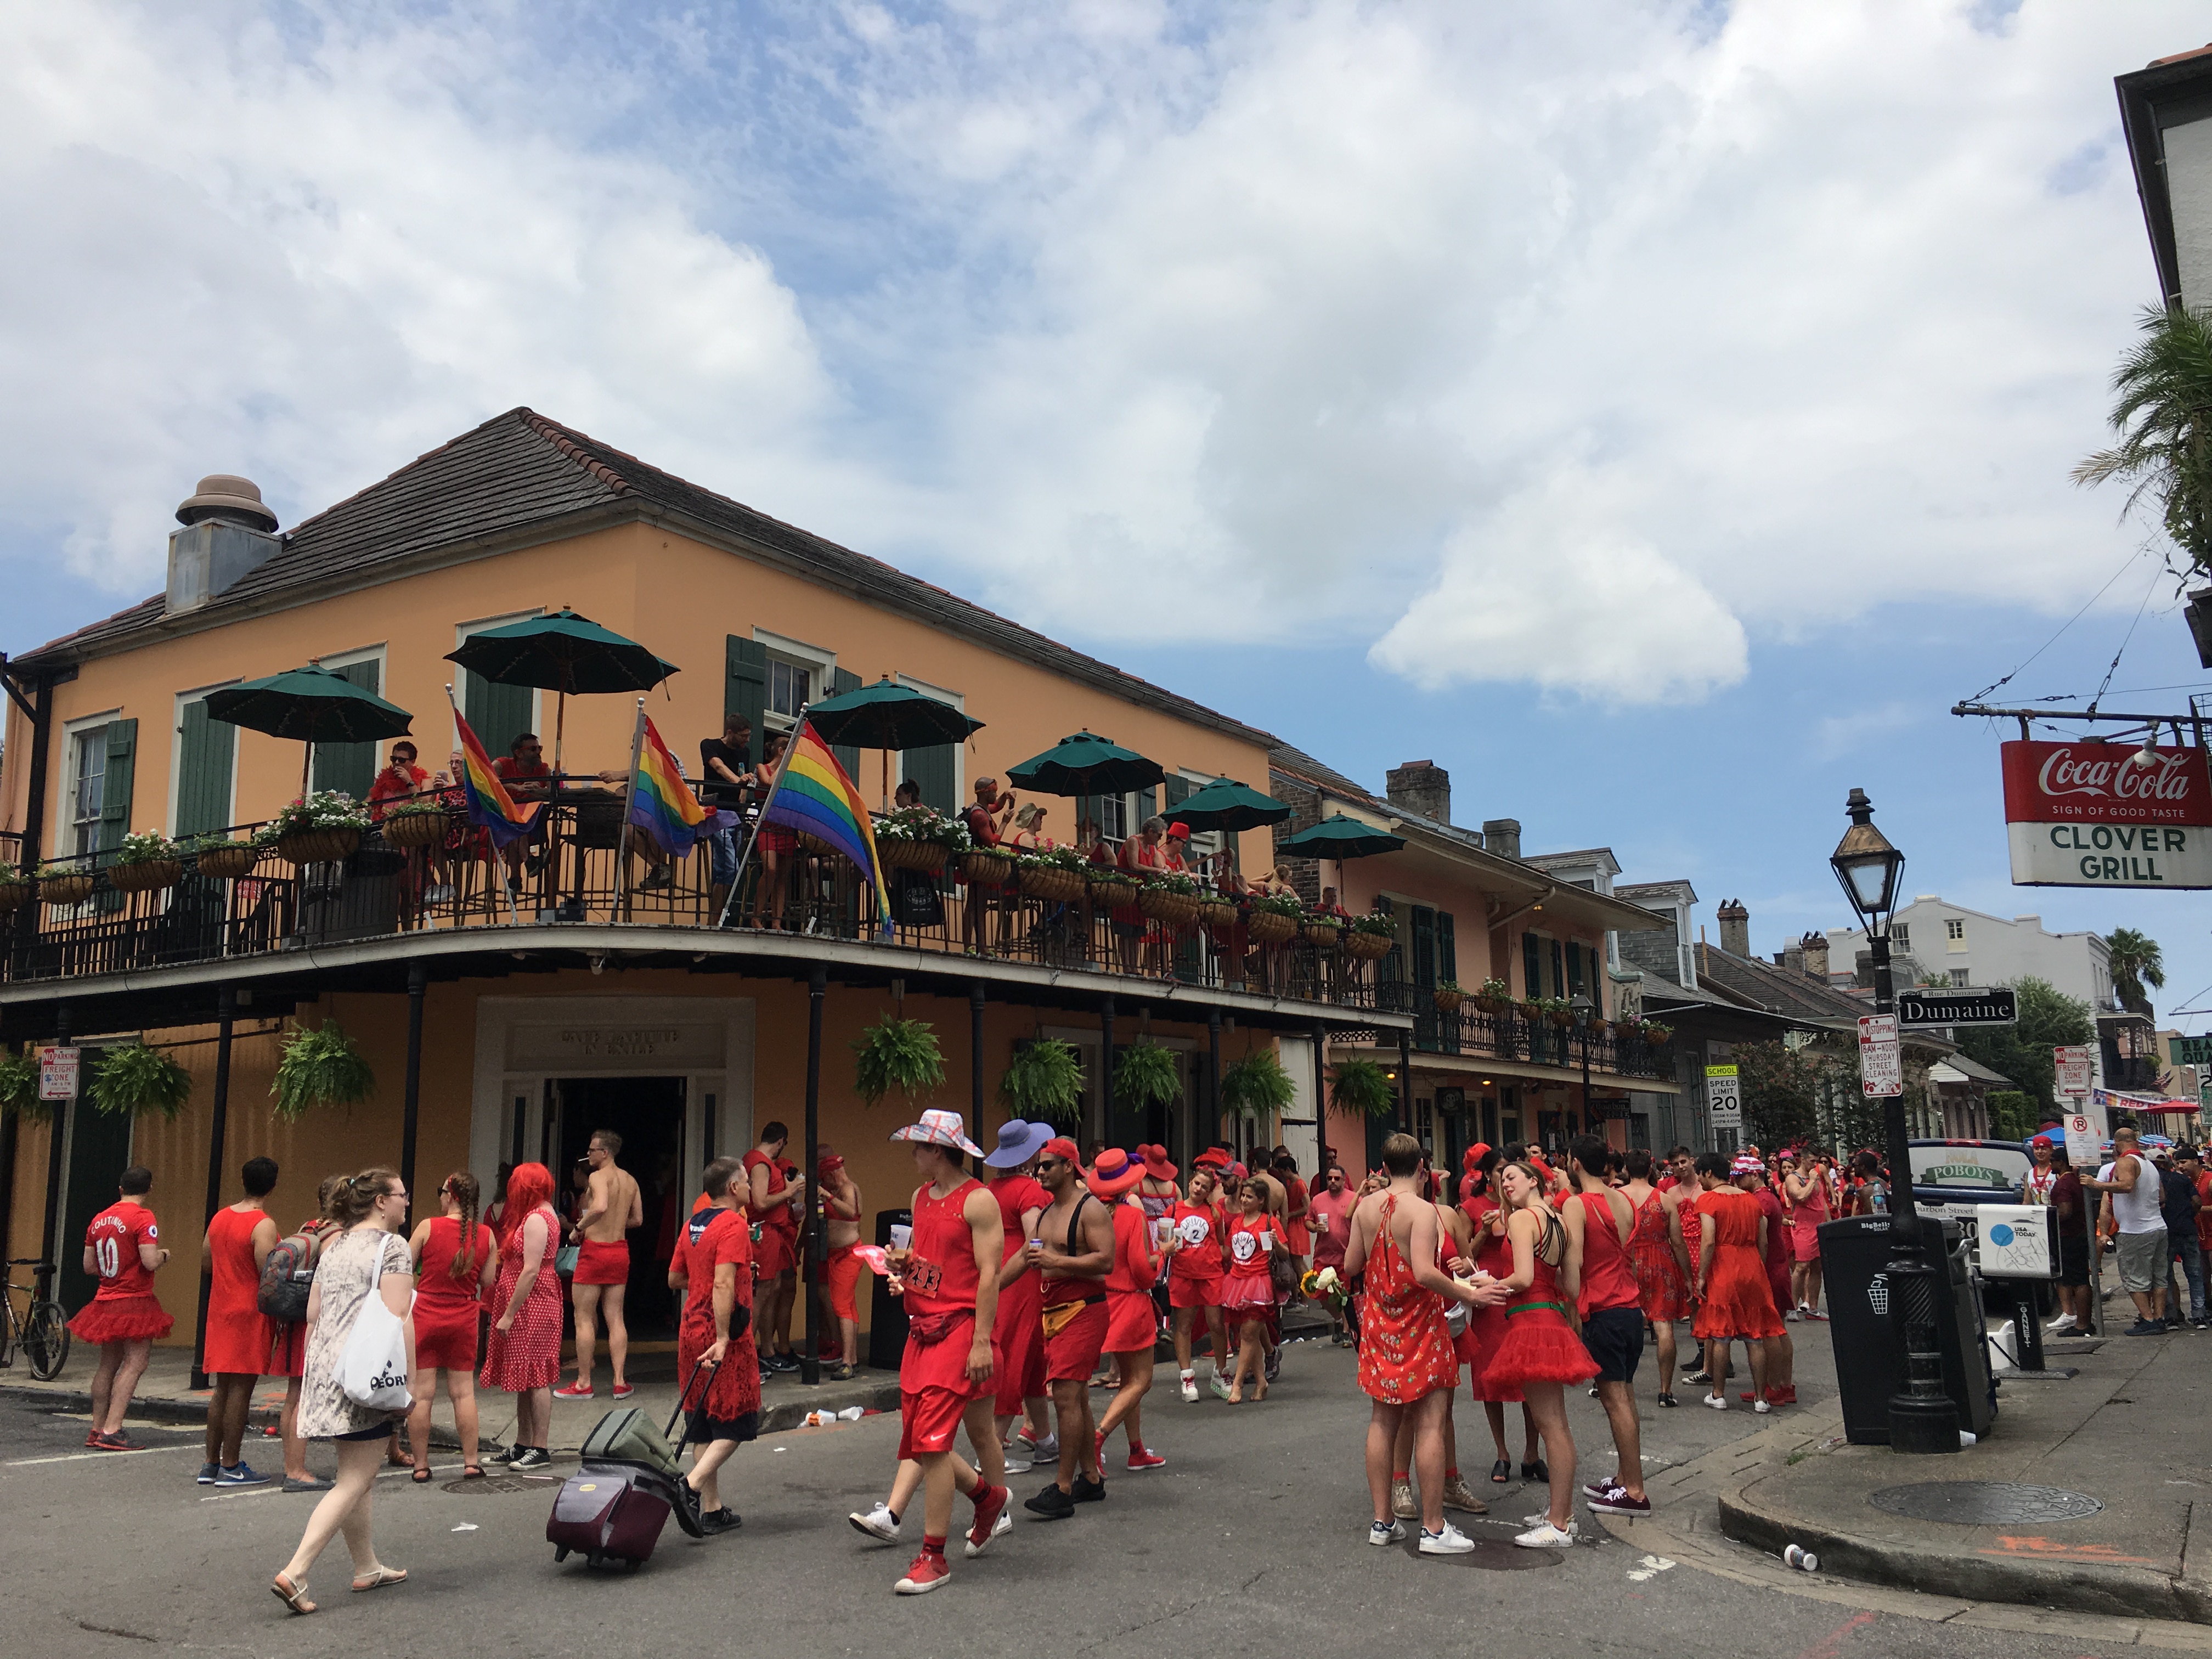 Male and female runners done red dresses in the streets of New Orleans for the annual Red Dress Run.